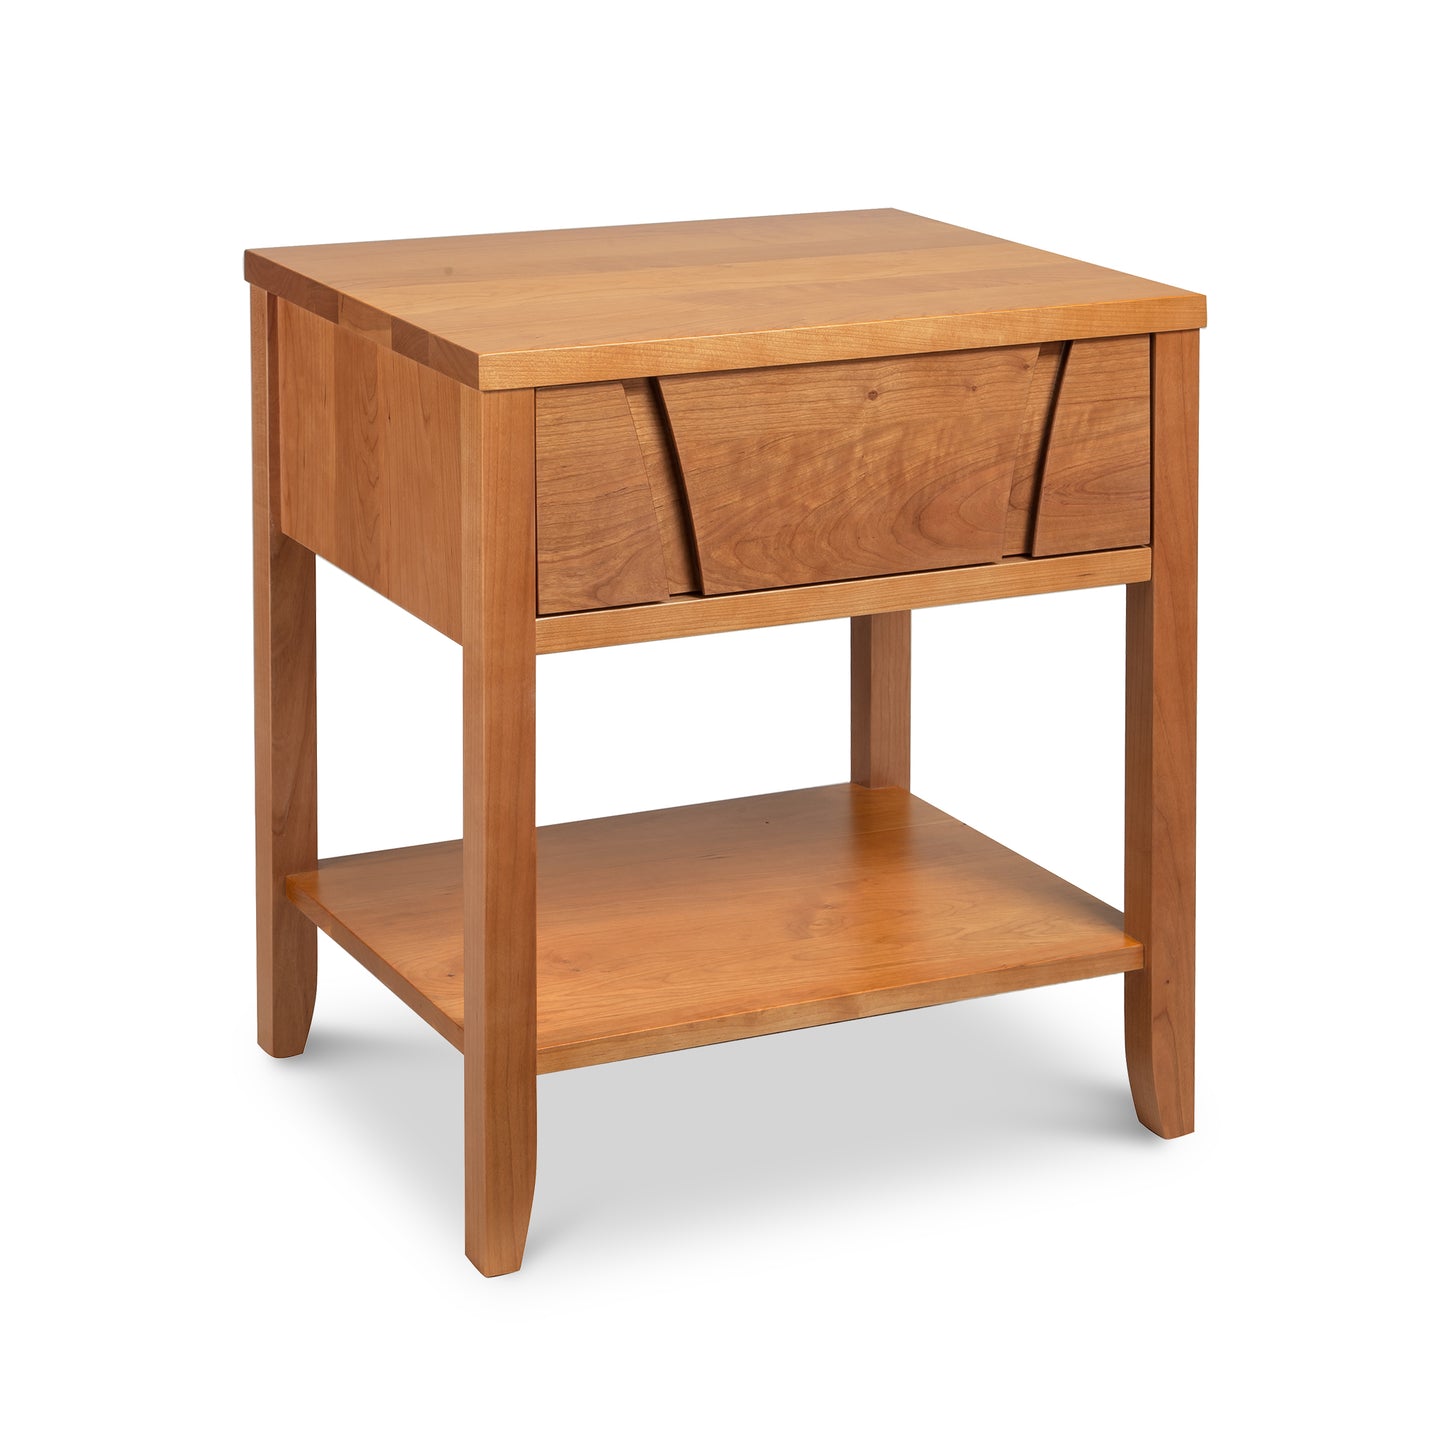 A Holland 1-Drawer Open Shelf Nightstand with a drawer on top, providing storage, made by Lyndon Furniture.